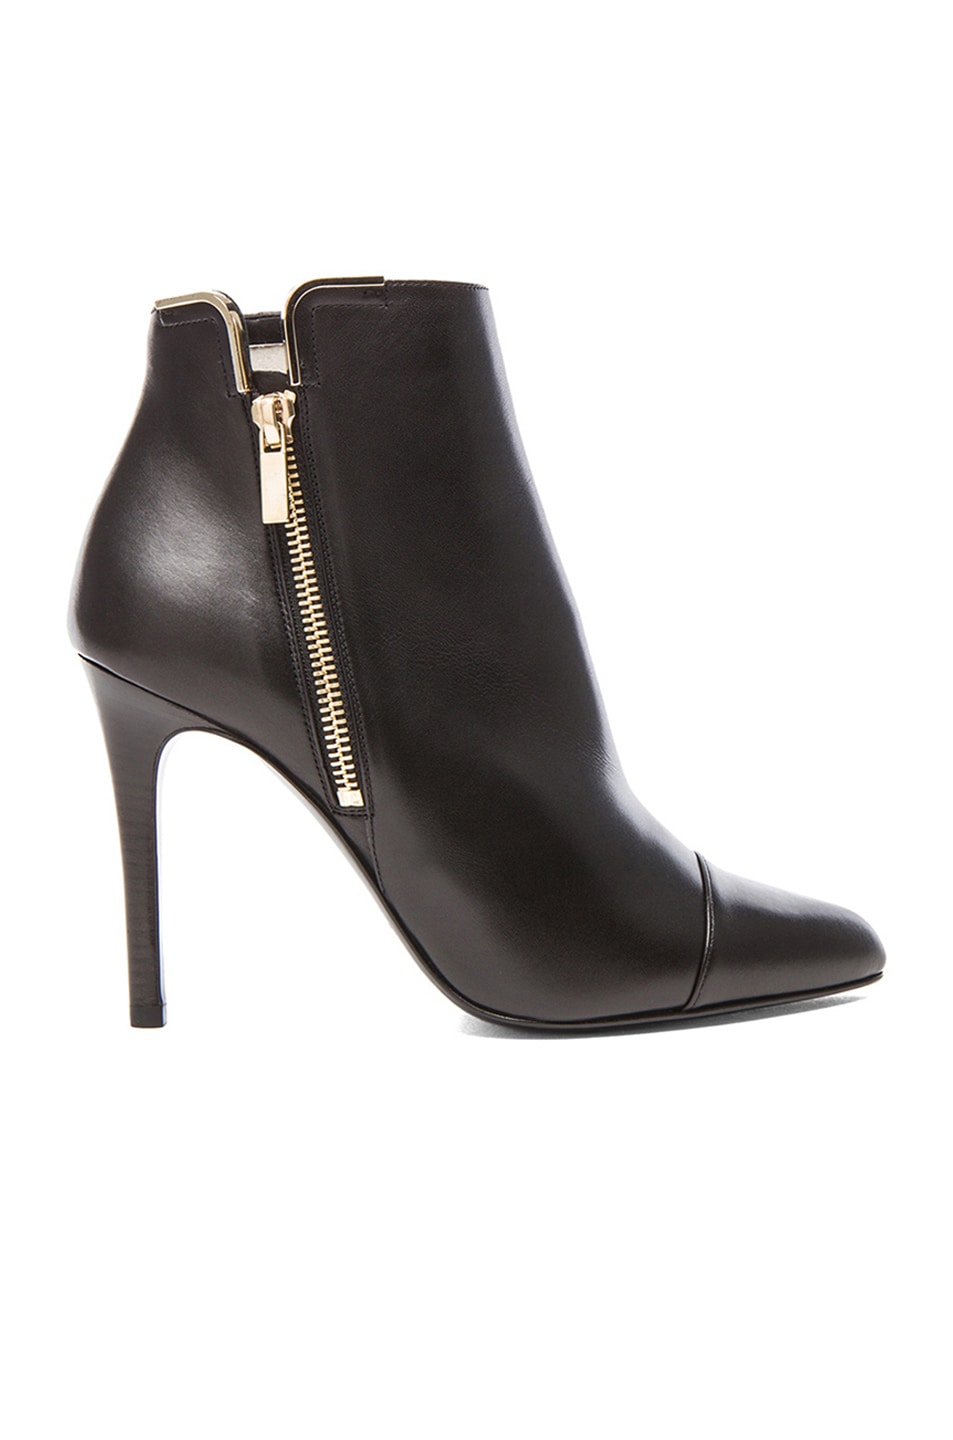 Lanvin Leather Ankle Boots in Black | FWRD